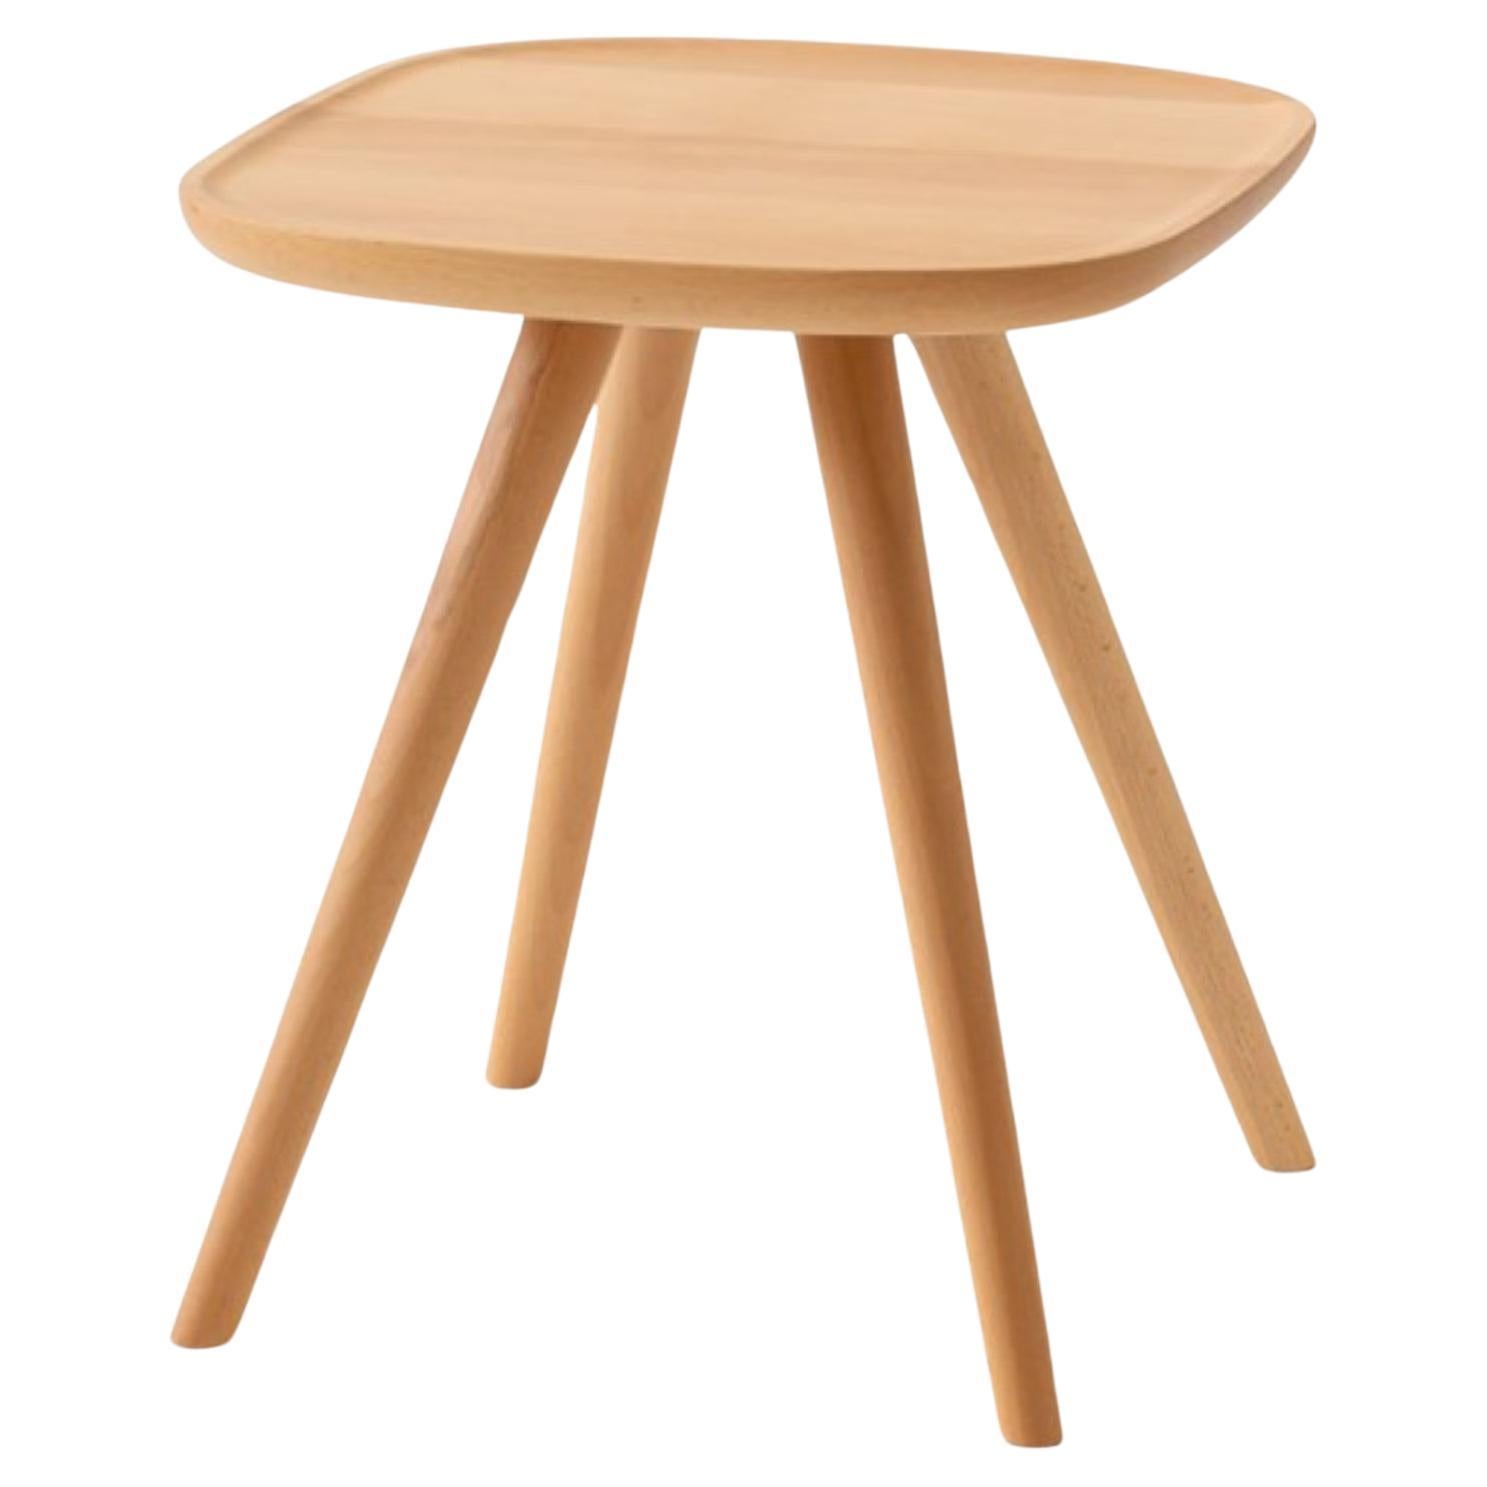 Japanese Modern Awase Series Modern Occasional Side Table in Beech By HIDA